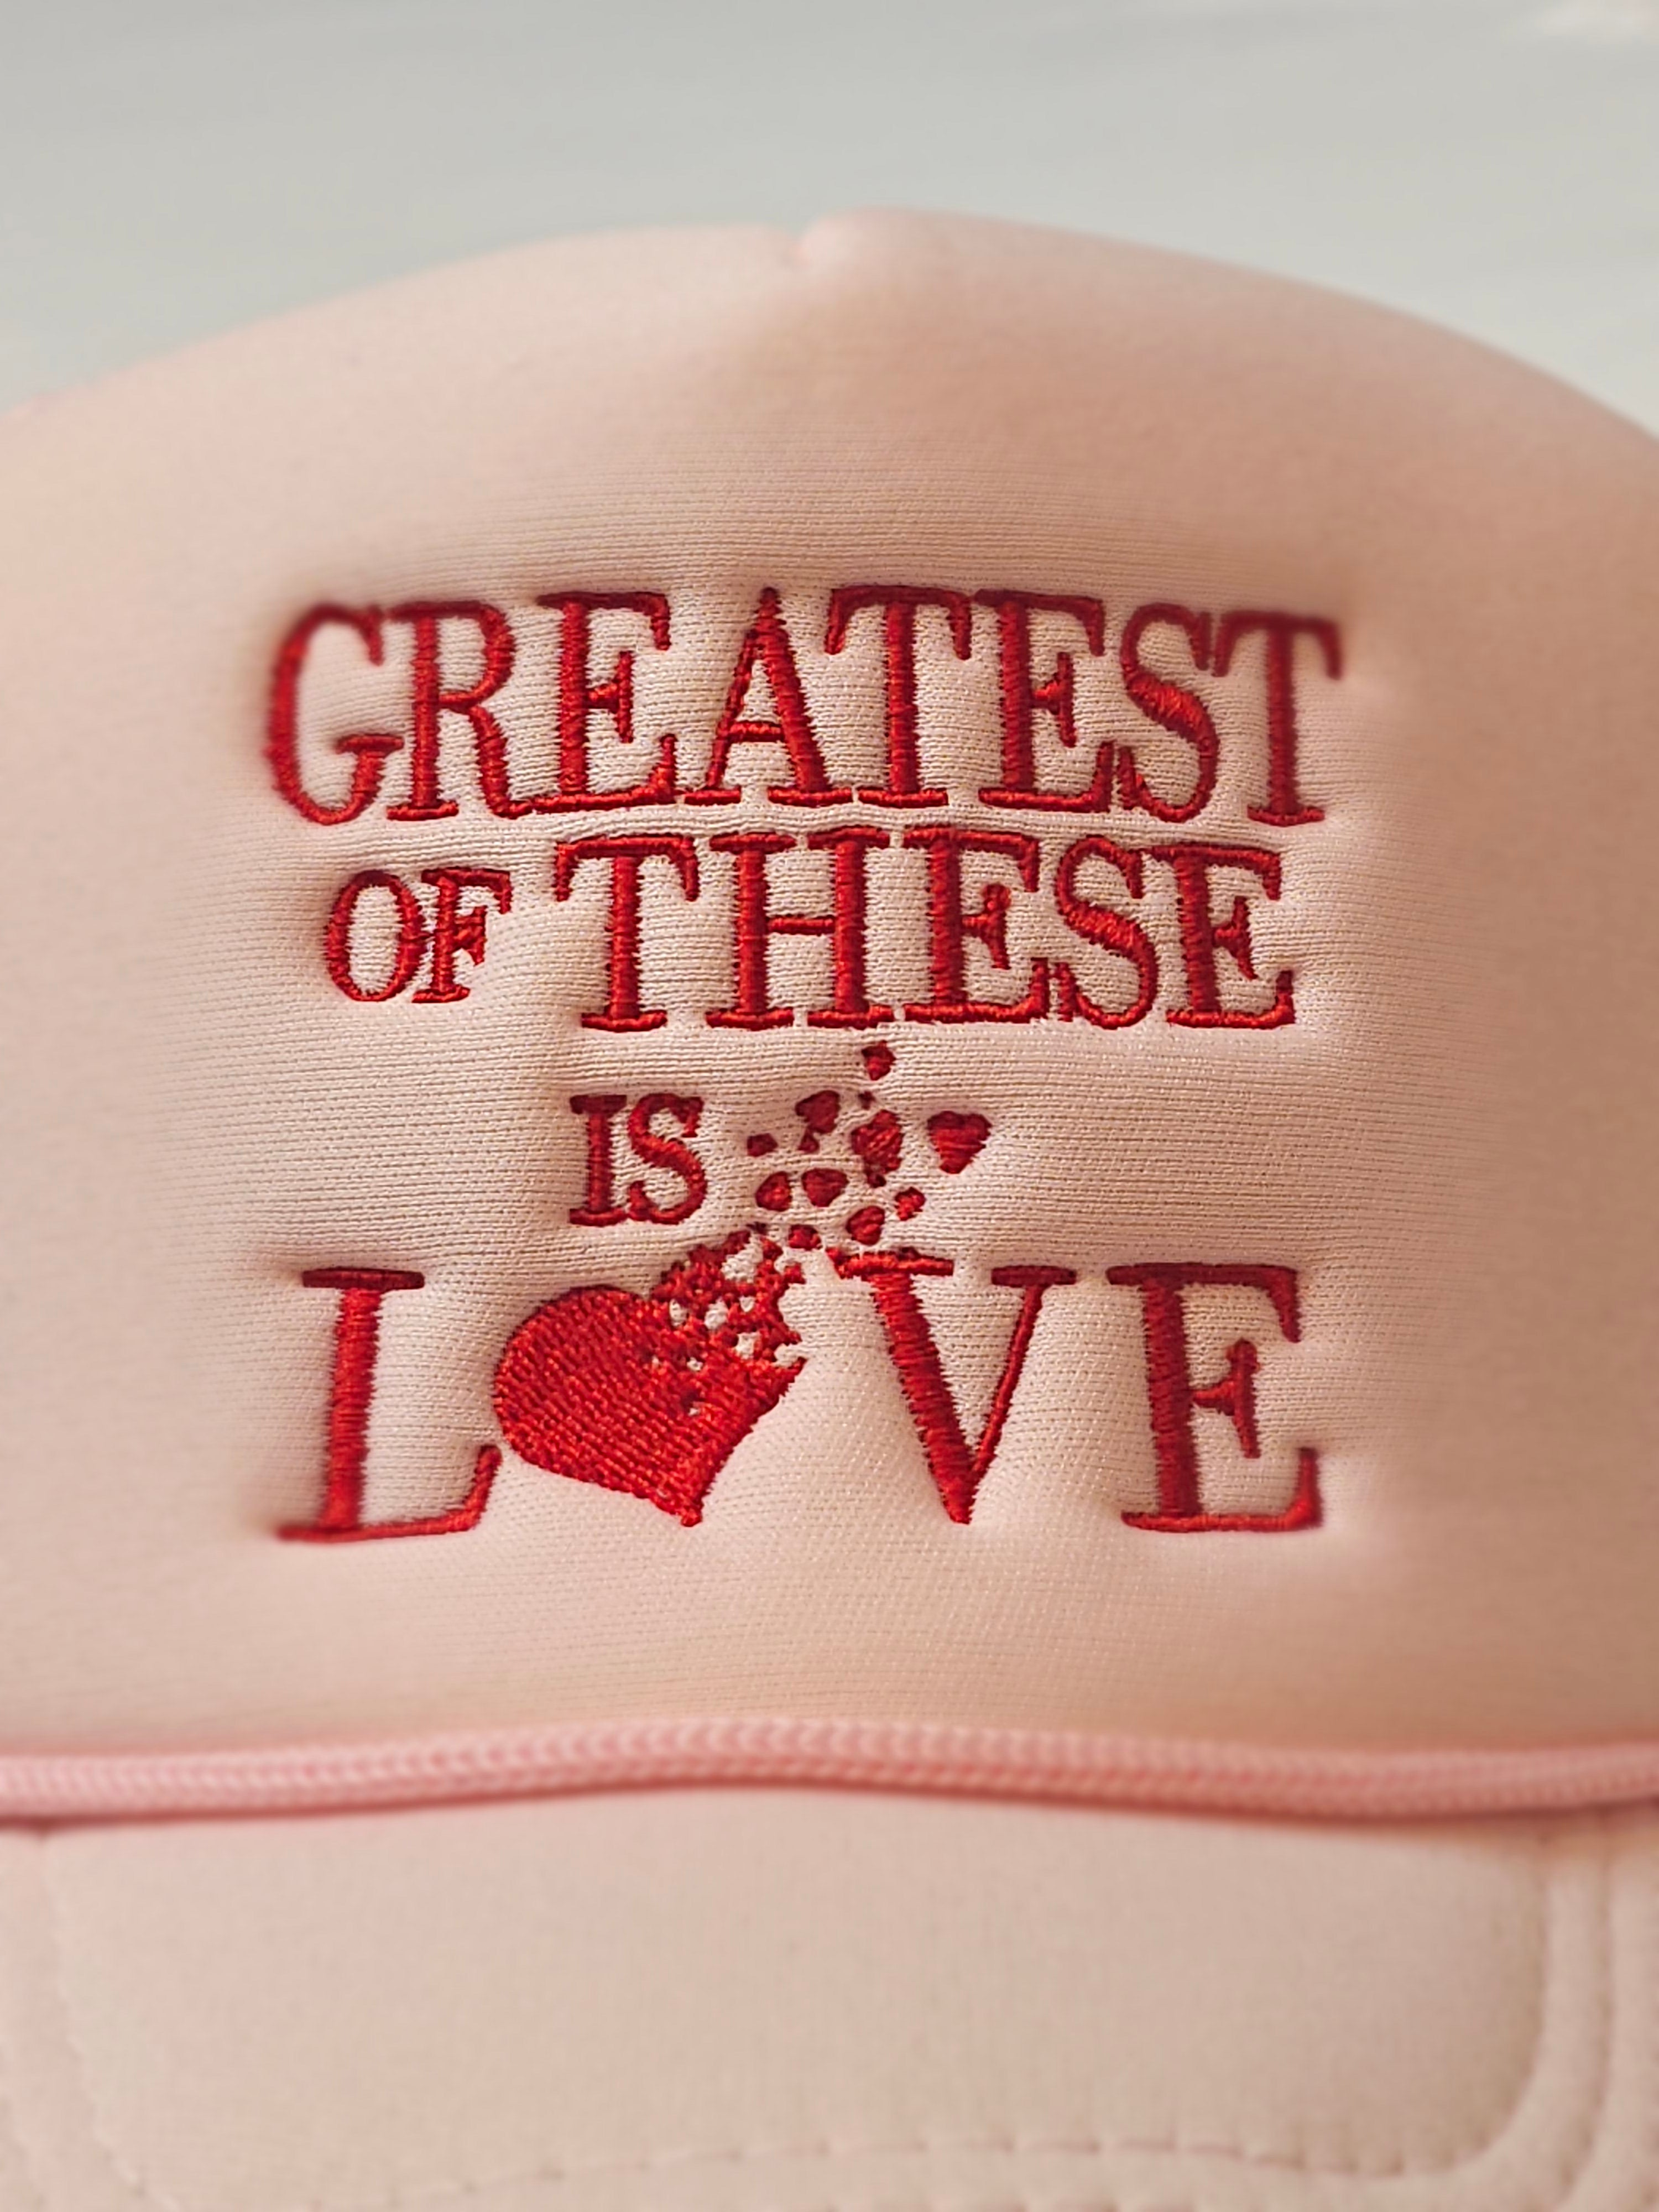 Greatest Of These is Love Hat